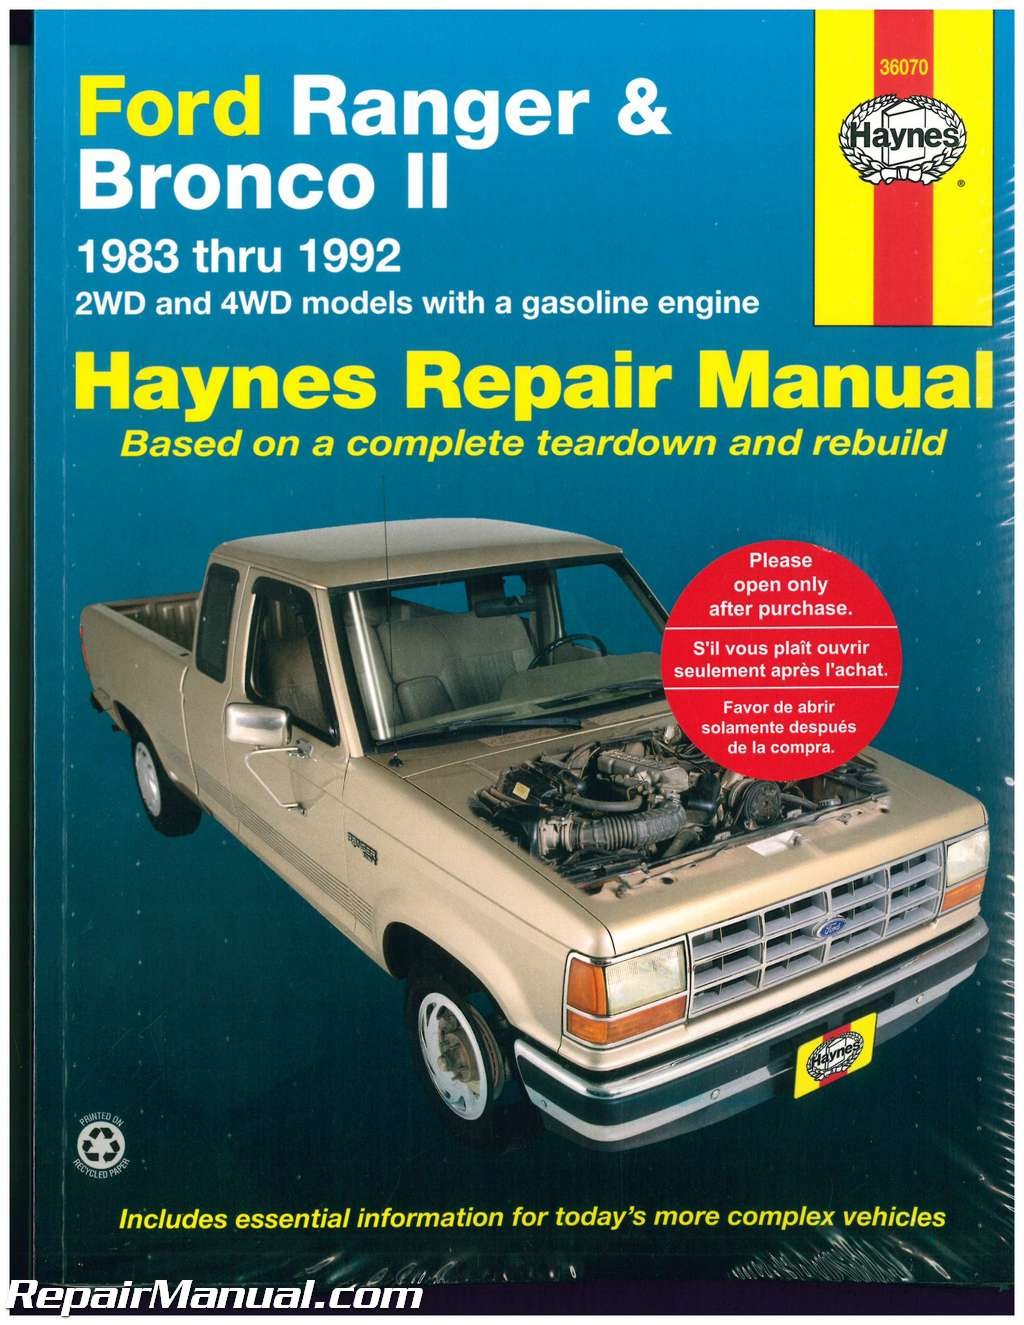 Picture of: Ford Ranger Pick-up Trucks and Bronco II – Haynes Truck